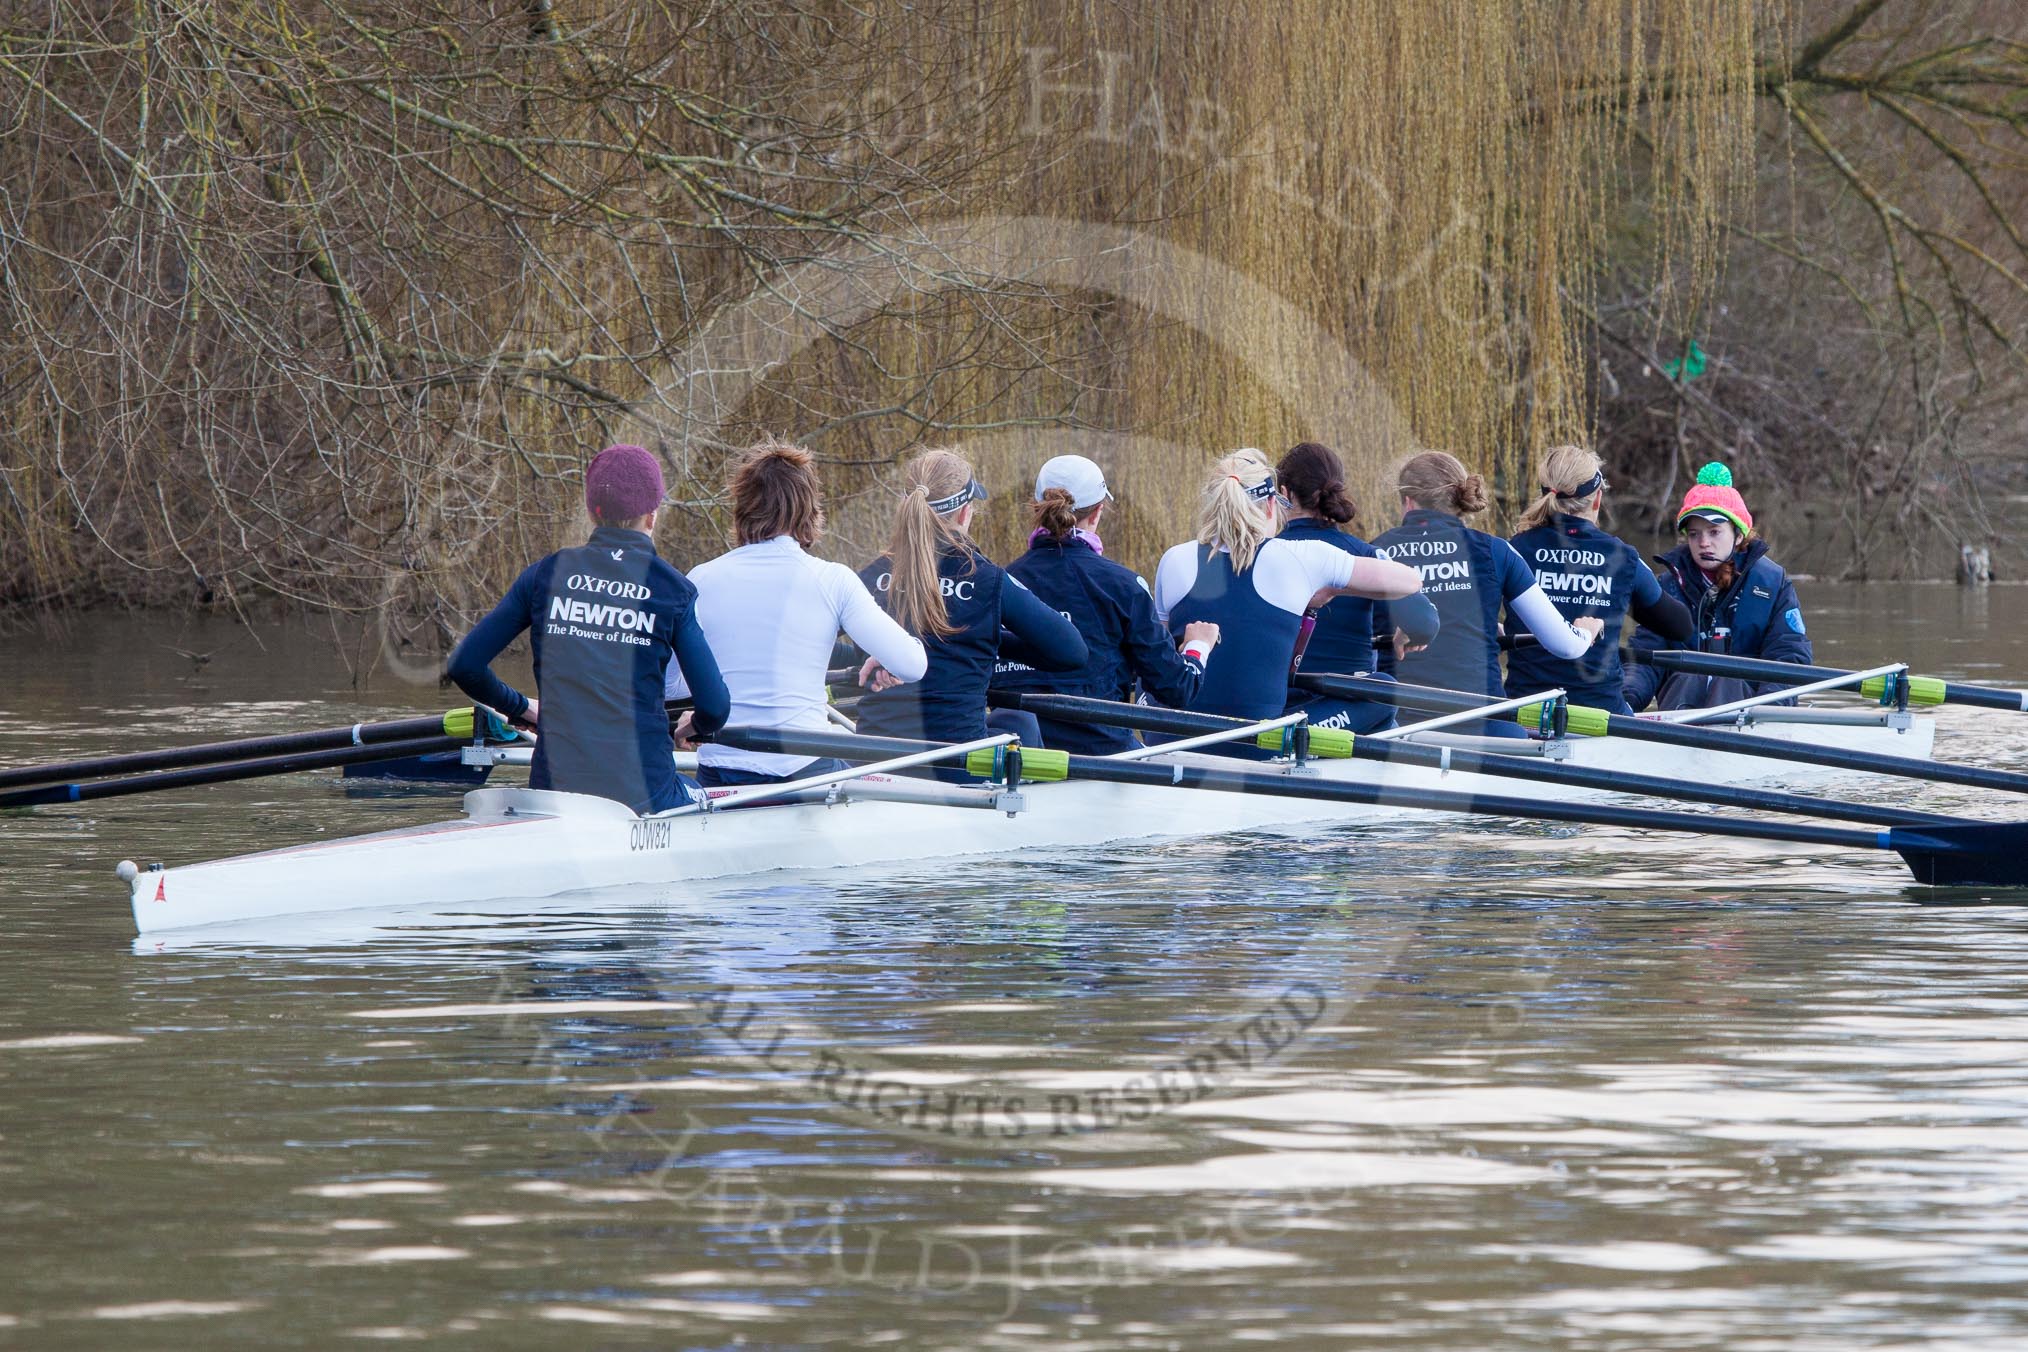 The Boat Race season 2013 - OUWBC training: The OUWBC Blue Boat during the training session - bow Mariann Novak, Alice Carrington-Windo, Mary Foord-Weston, Jo Lee, Amy Varney, Harriet Keane, Anastasia Chitty, stroke Maxie Scheske, and cox Katie Apfelbaum..
River Thames,
Wallingford,
Oxfordshire,
United Kingdom,
on 13 March 2013 at 17:11, image #97